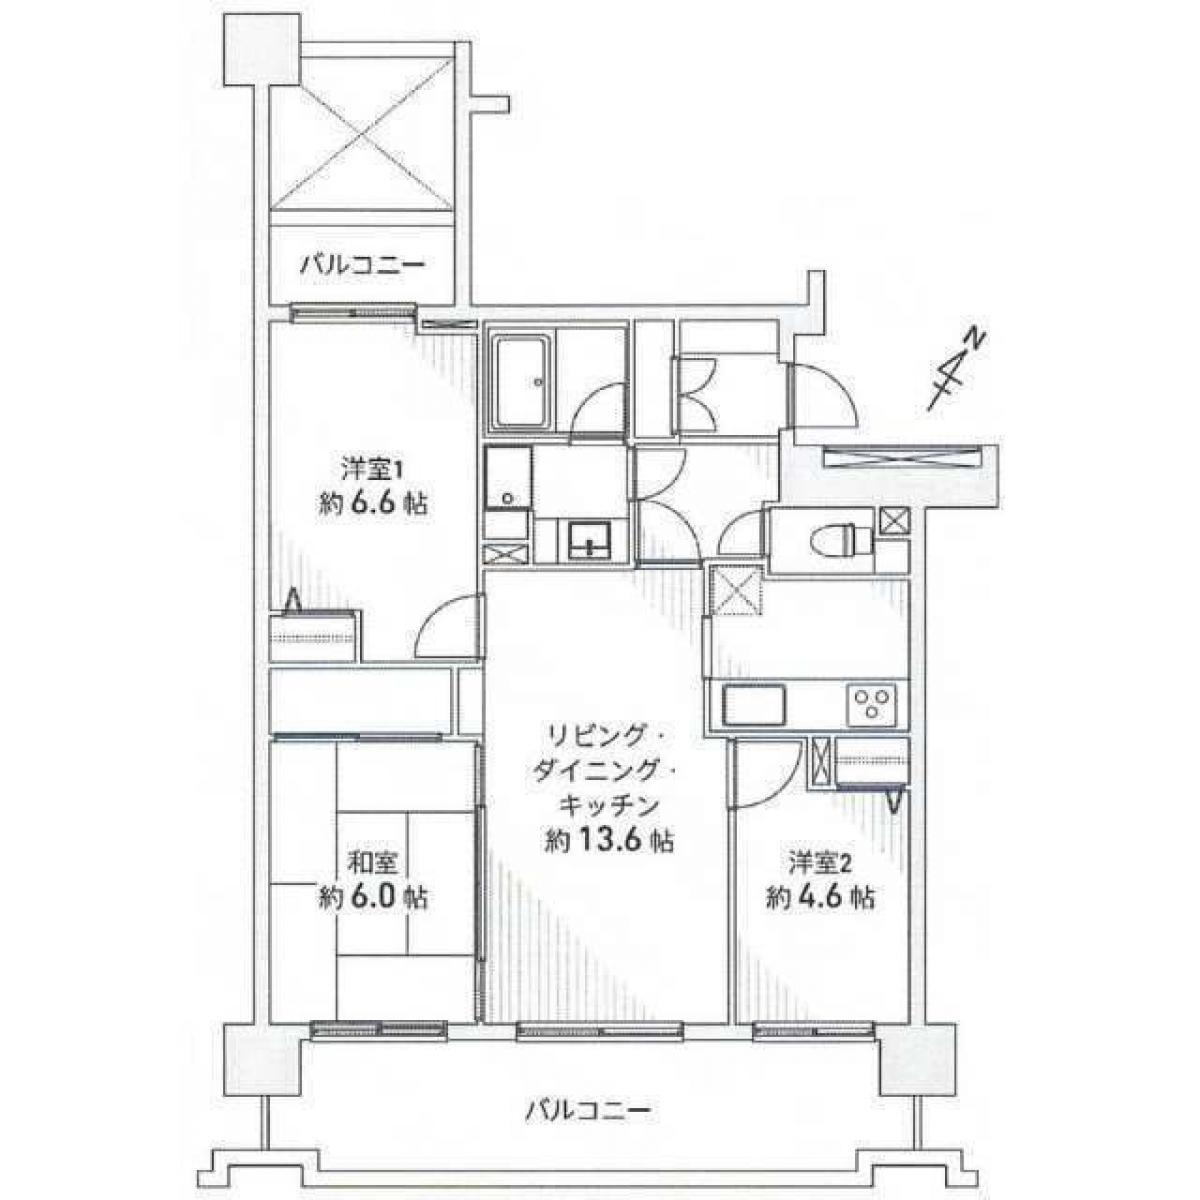 Picture of Apartment For Sale in Seto Shi, Aichi, Japan